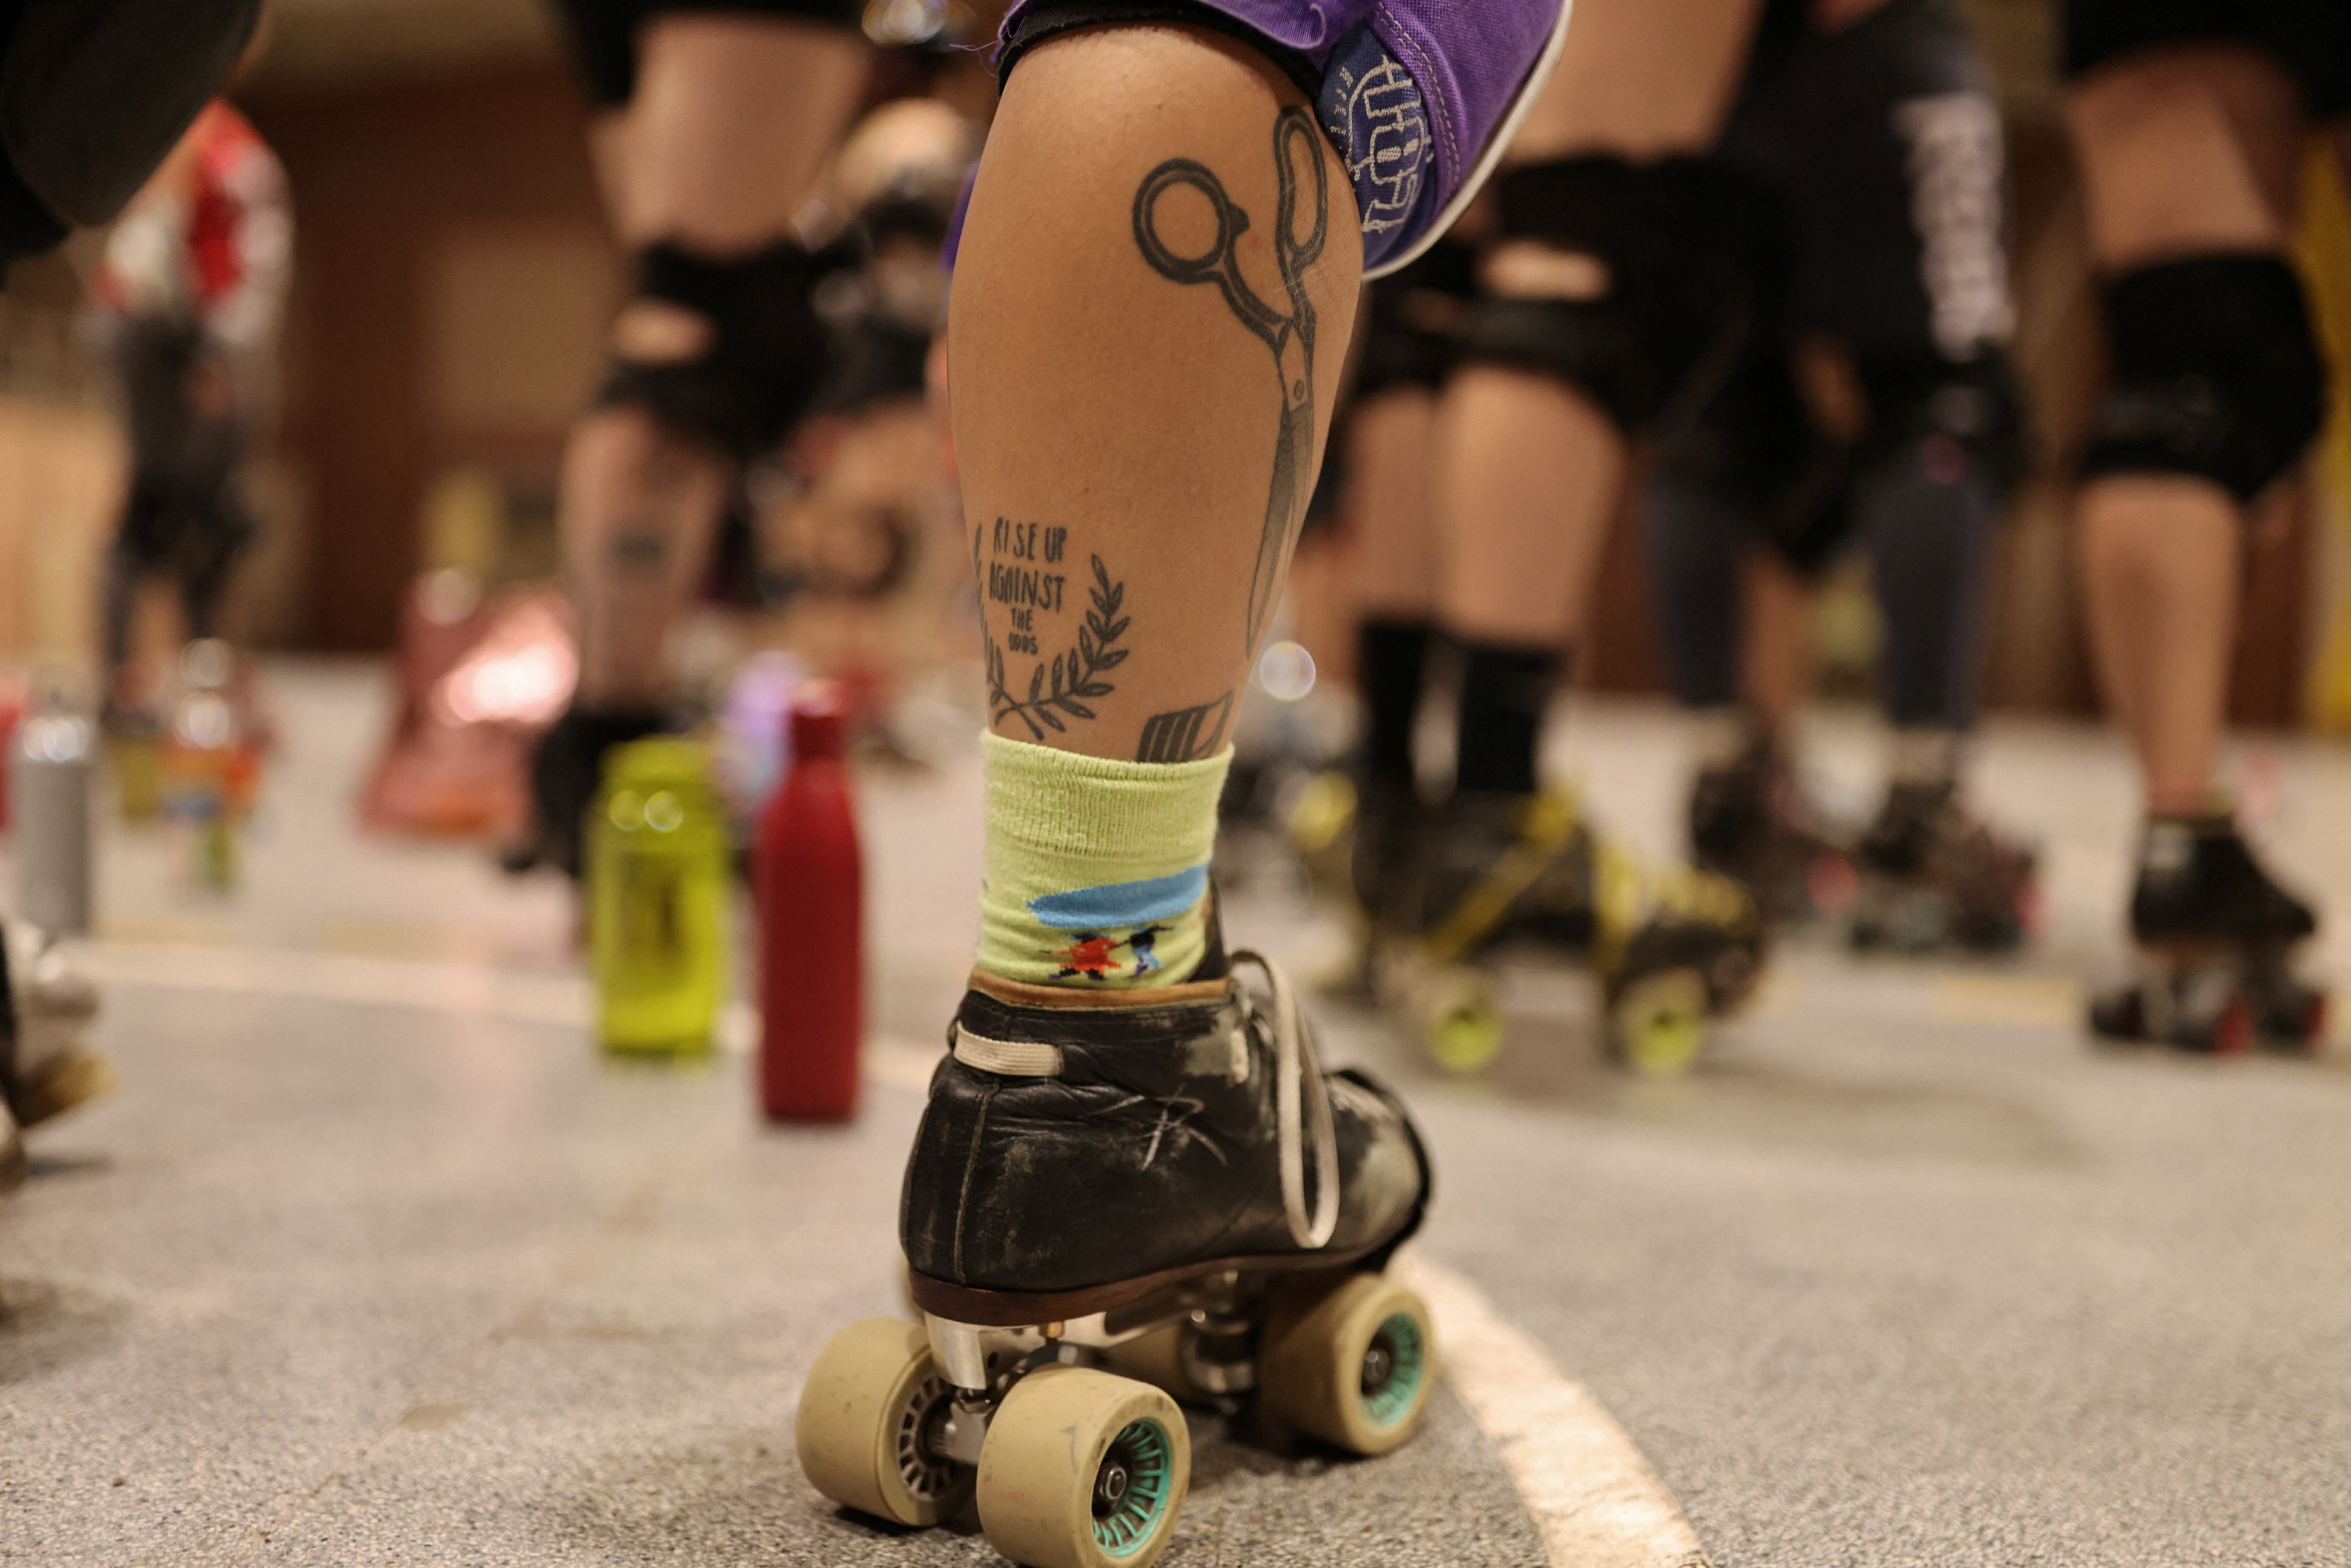 Roller skating is back in fashion and is more diverse than ever before, Sports